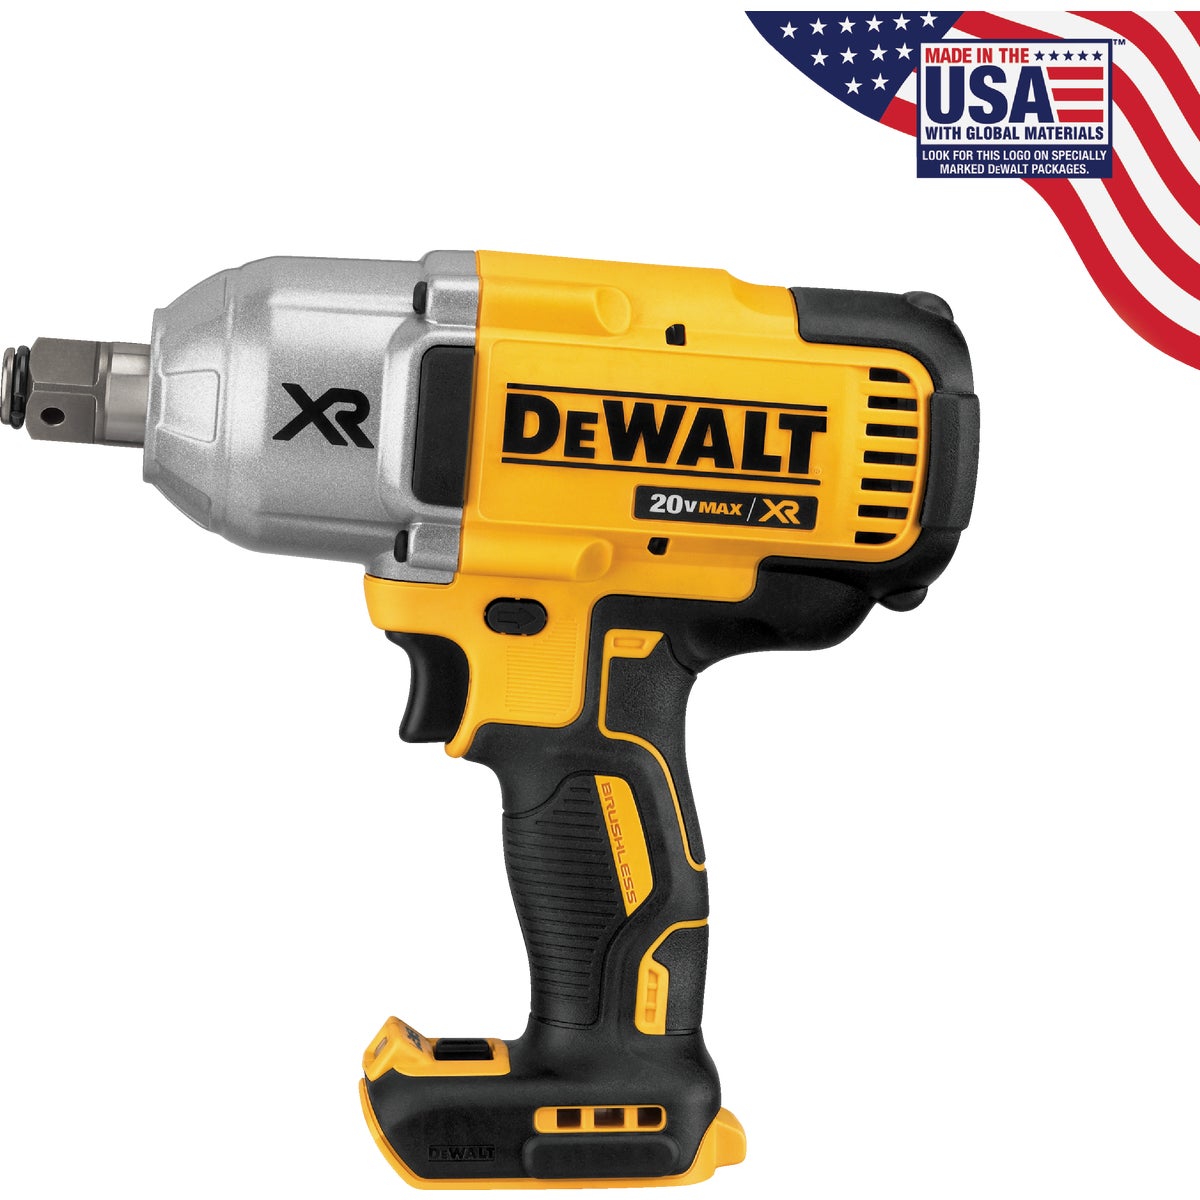 DEWALT 20V MAX XR Lithium-Ion Brushless 3/4 In. Cordless Impact Wrench with Hog Ring Anvil (Tool Only)